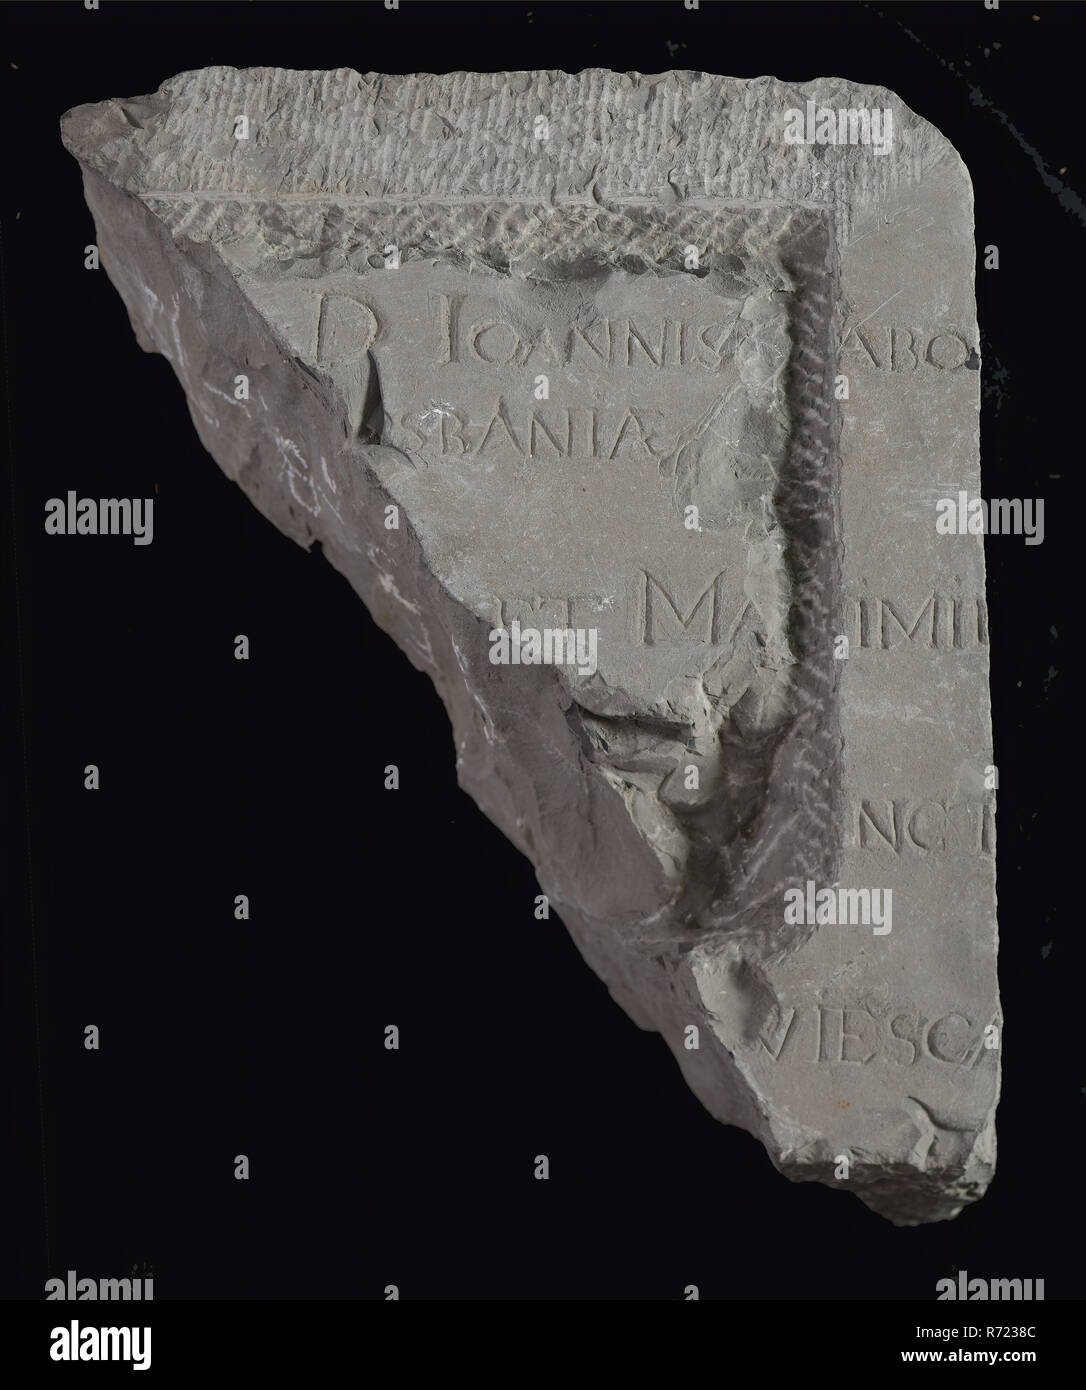 Fragment stone with text ioannis ... Sbania and later hacked frame, tombstone? memorial stone? facing brick? building component? slate stone, abo .. sbania ... et Ma .. imii .. nct .. viesca ... death mourning Stock Photo